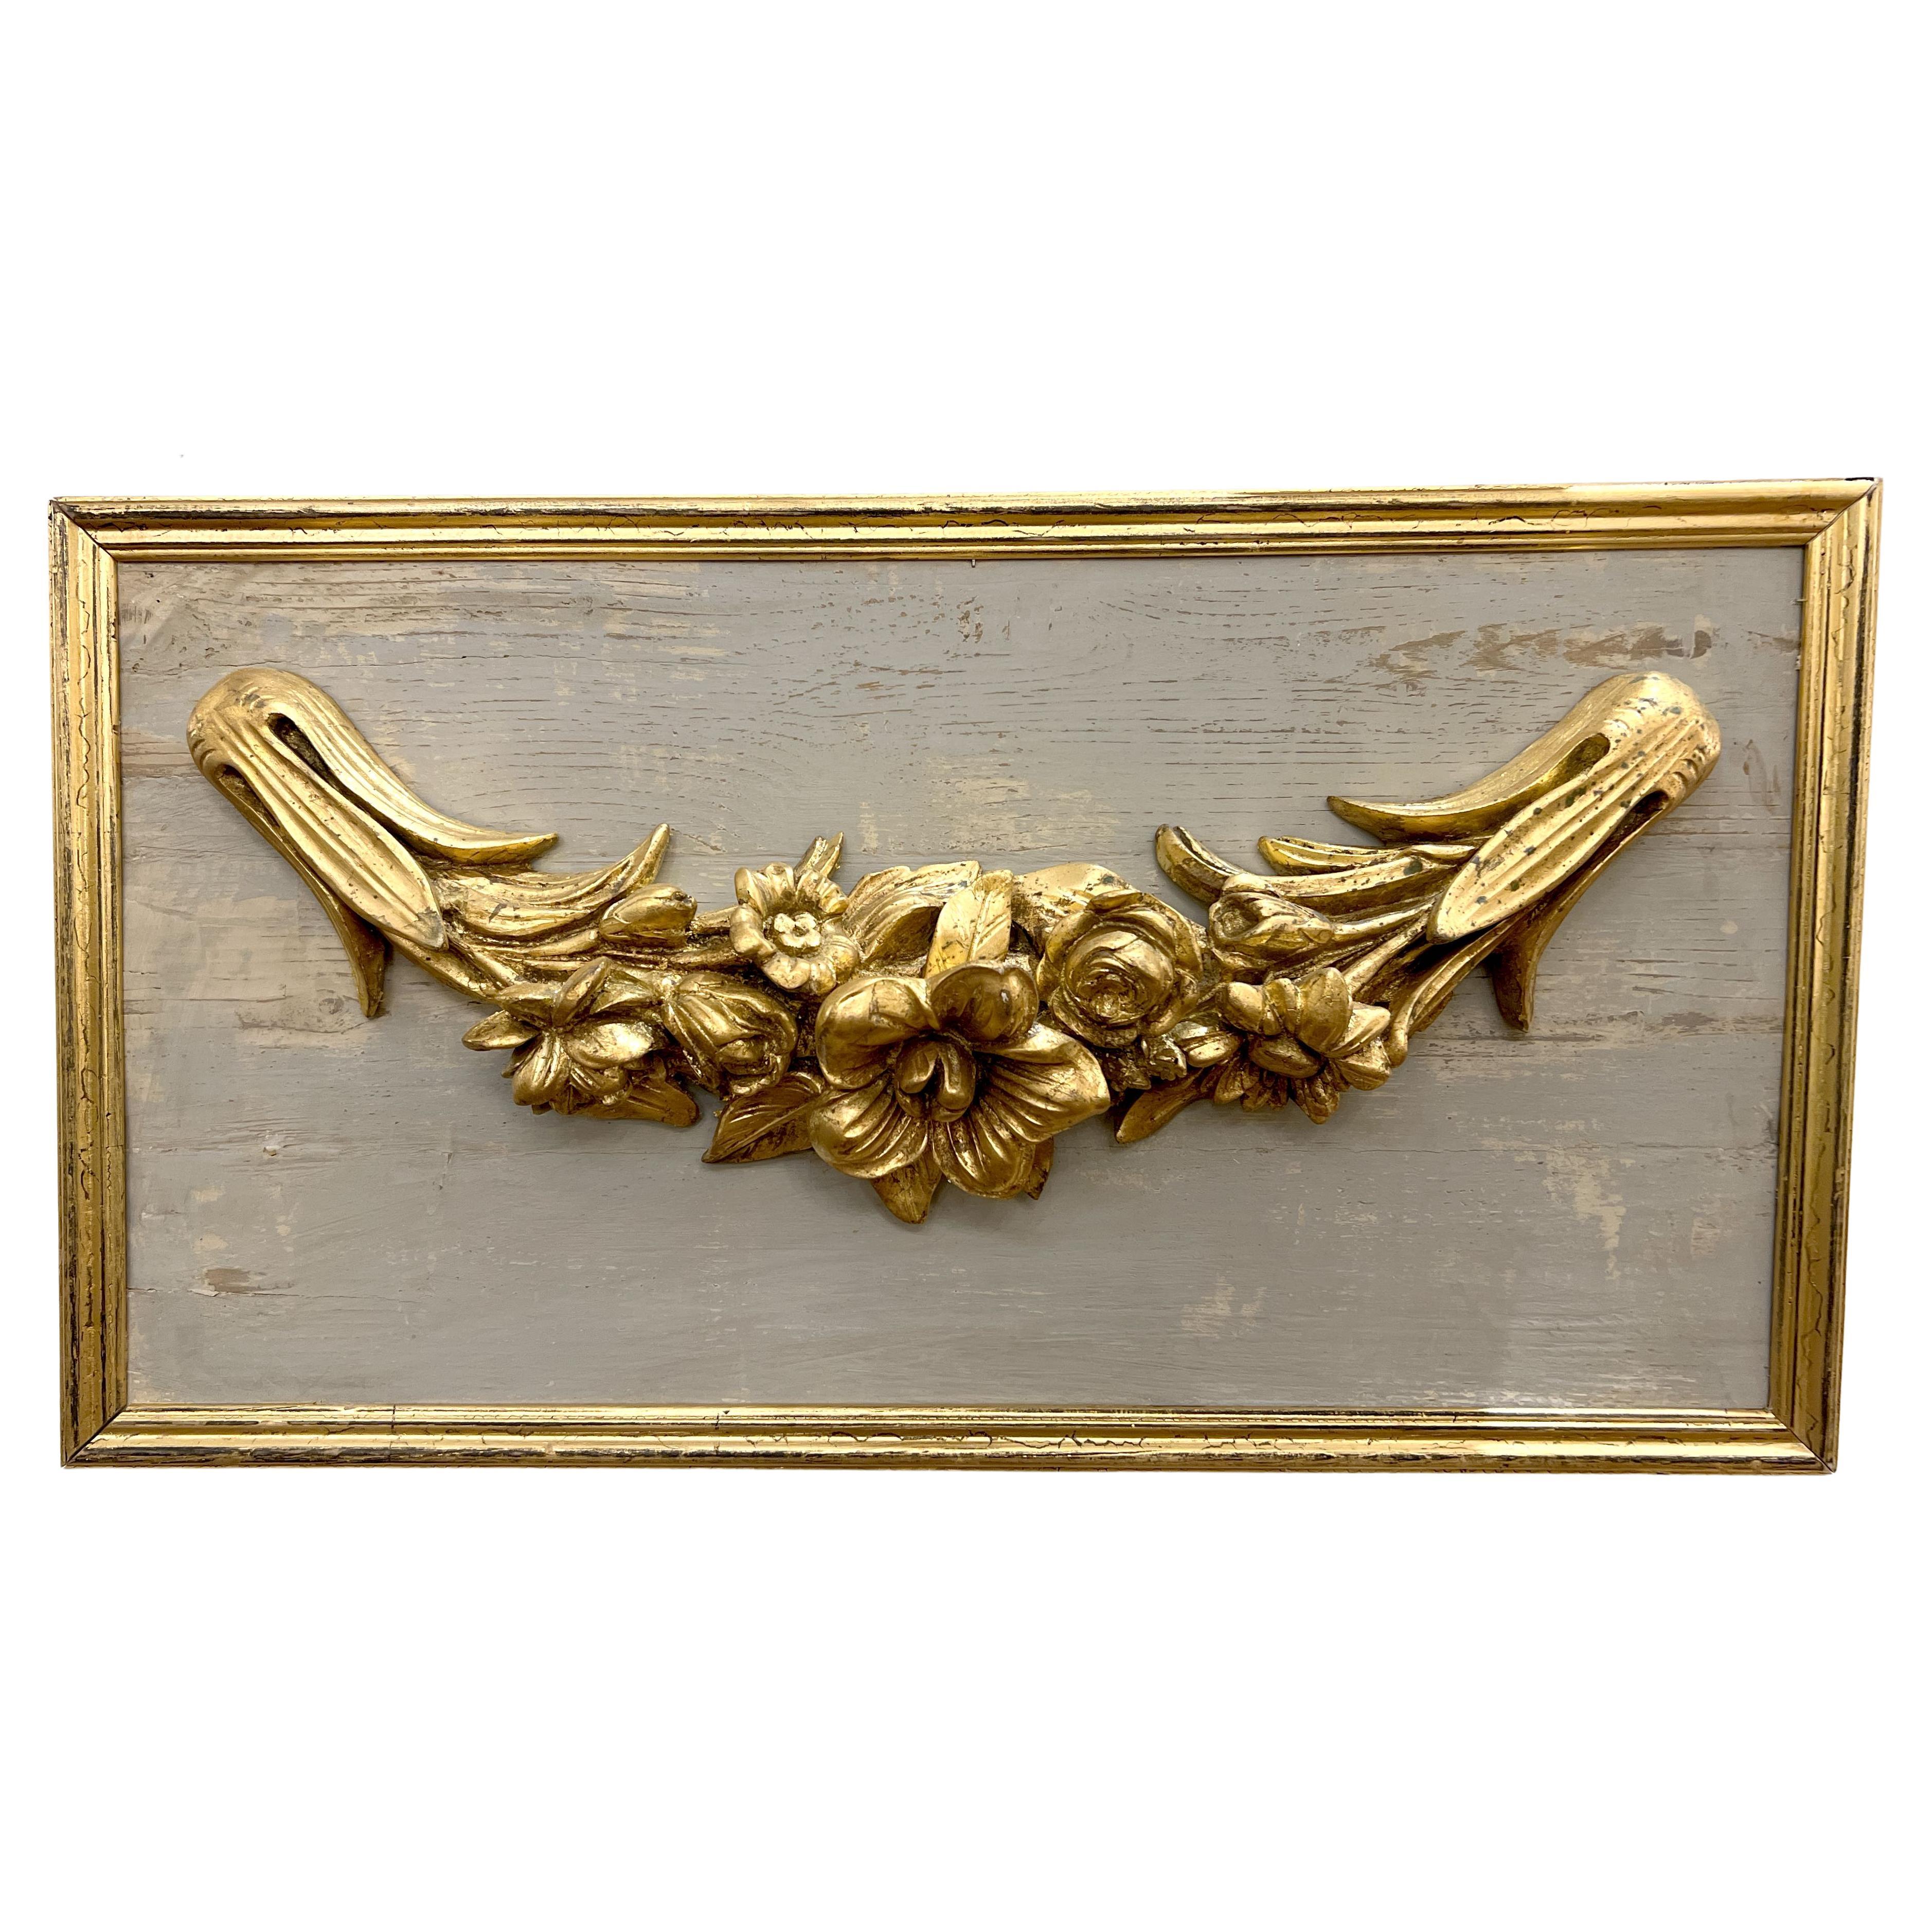 Antique Architectural Fragment circa 1800 Gilded and Framed  